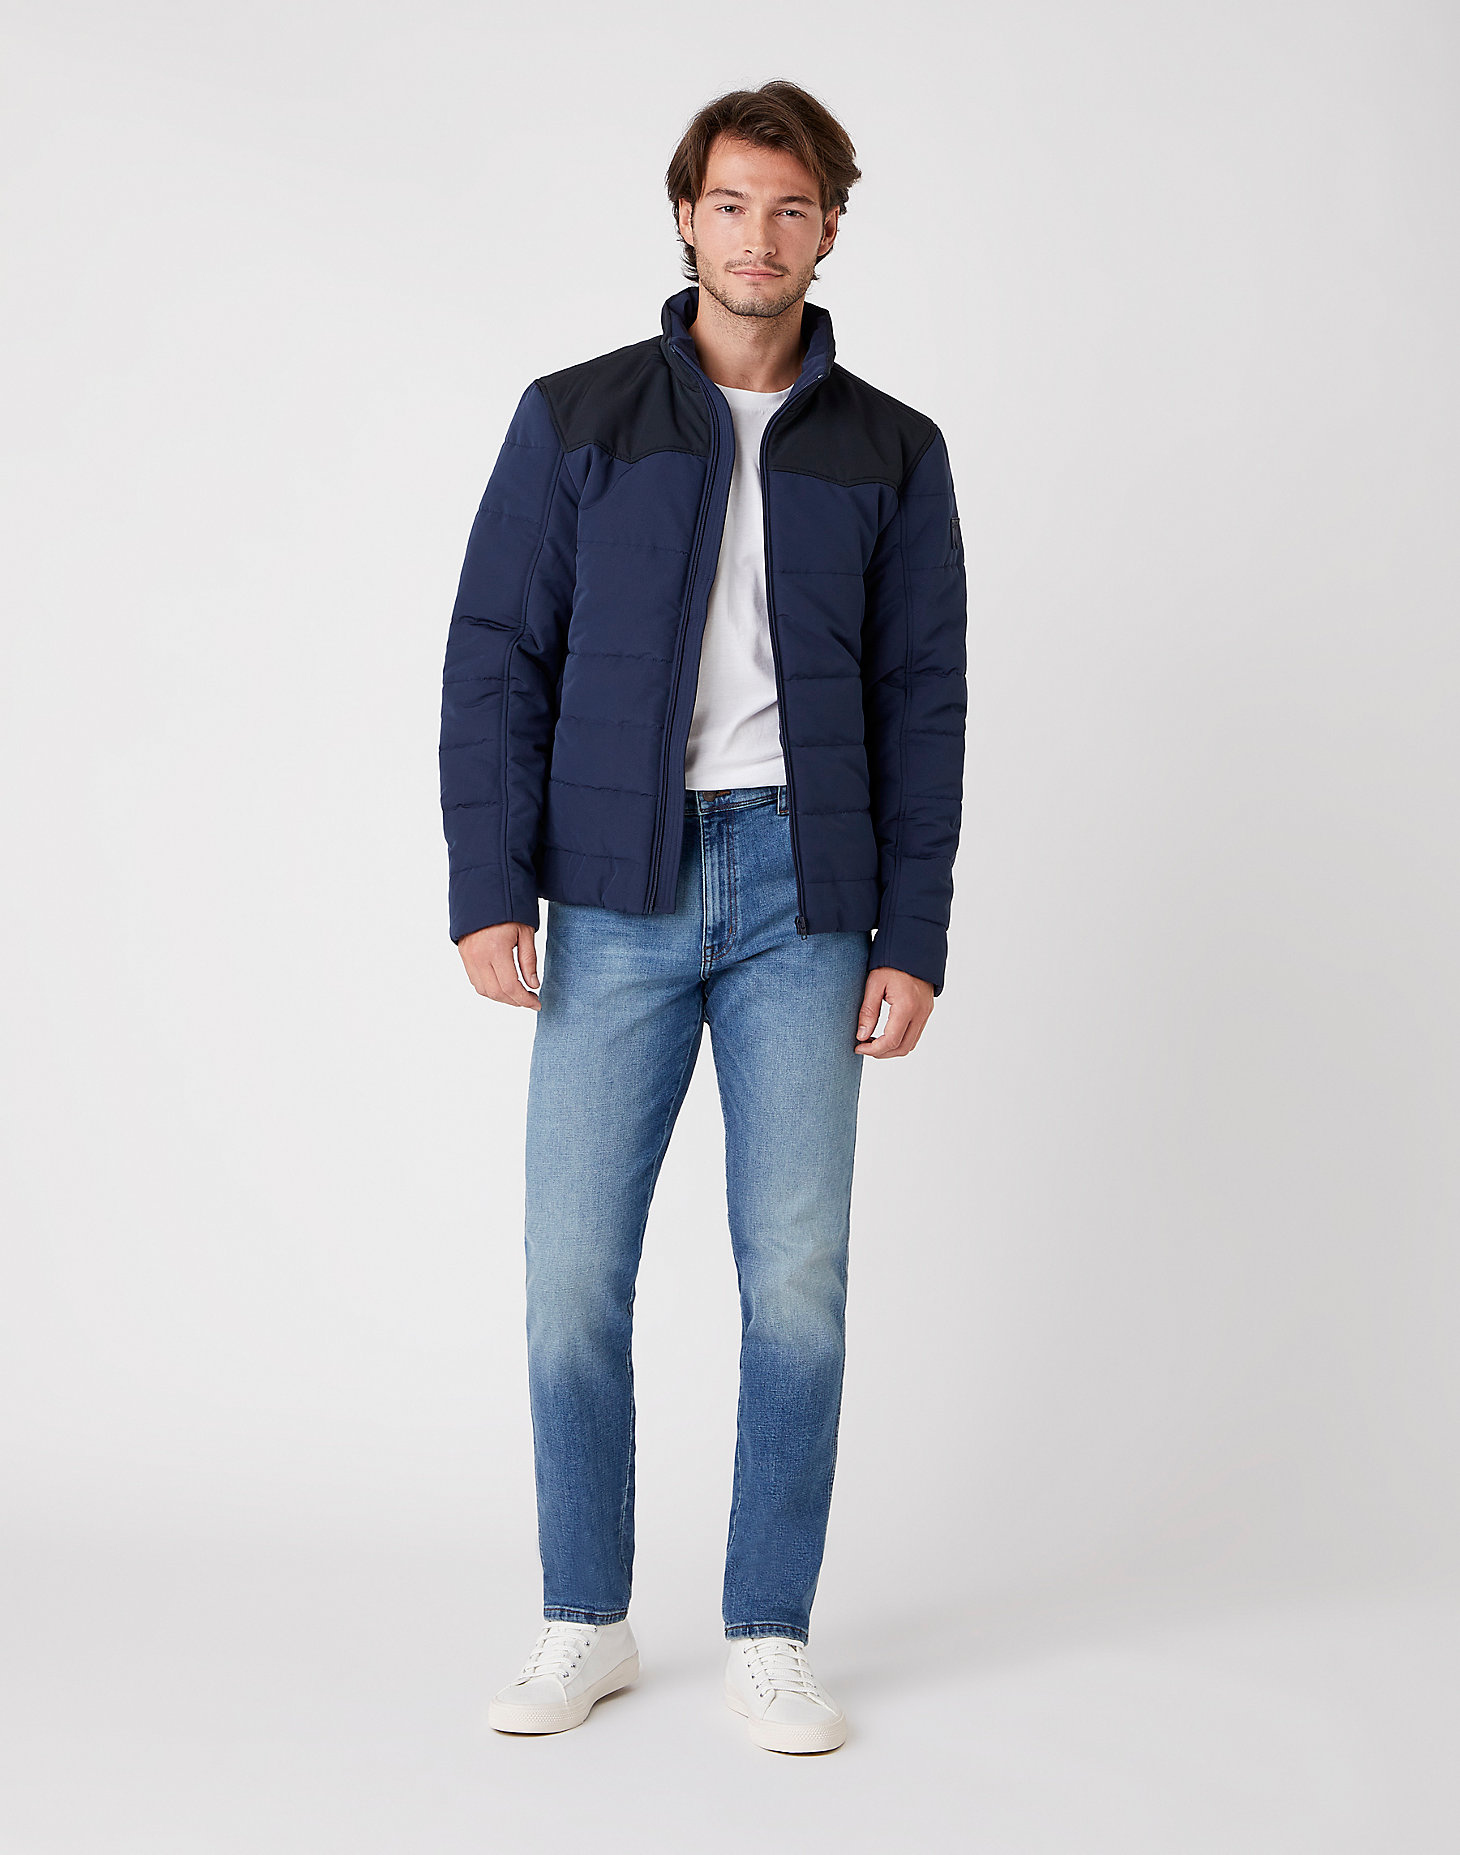 Transitional Puffer in Navy alternative view 1